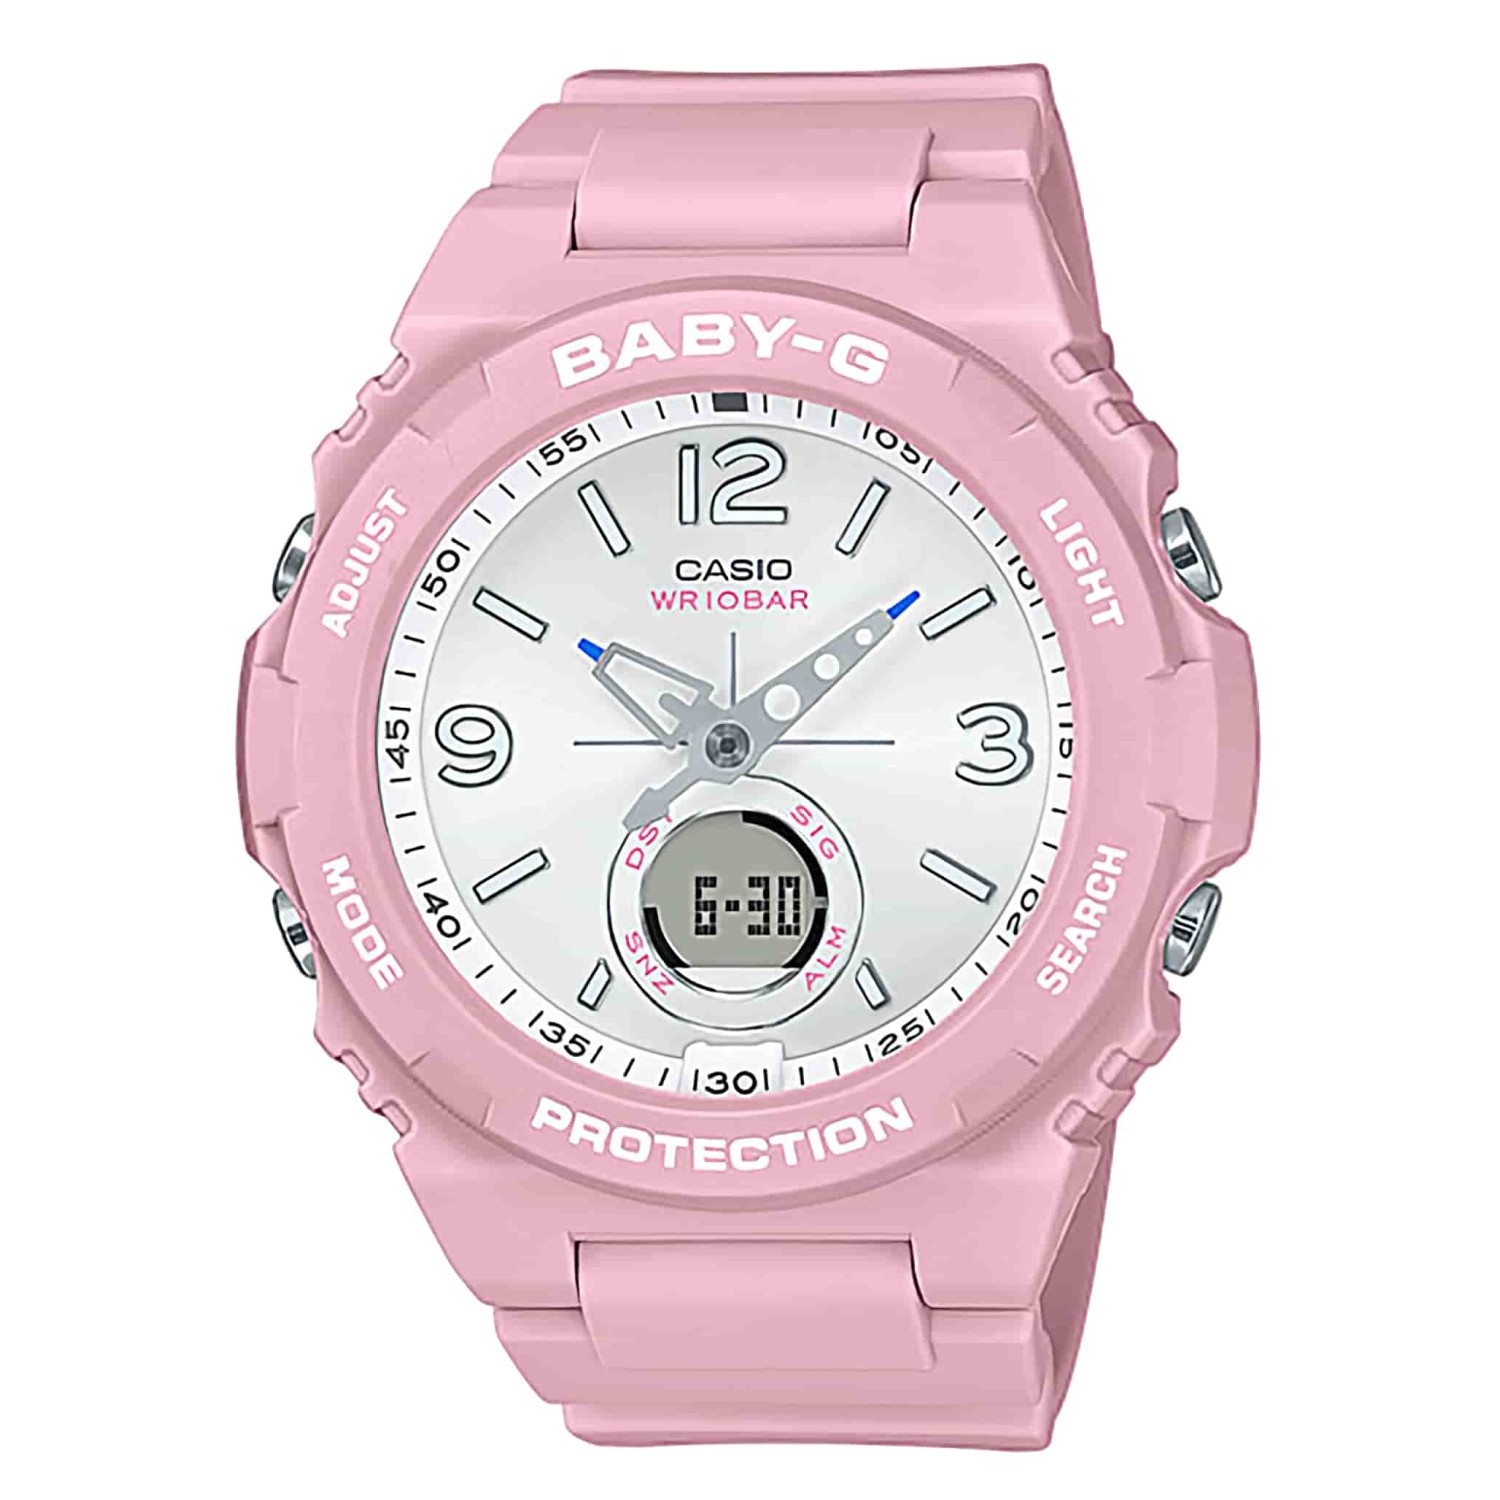 BGA260SC-4A Casio Baby-G Sports Watch. These new models for the summer outdoor and leisure scene are some of the latest additions to the BABY-G lineup of casual watches for active women.The base model is the BGA-260, whose design makes it fit right in whe